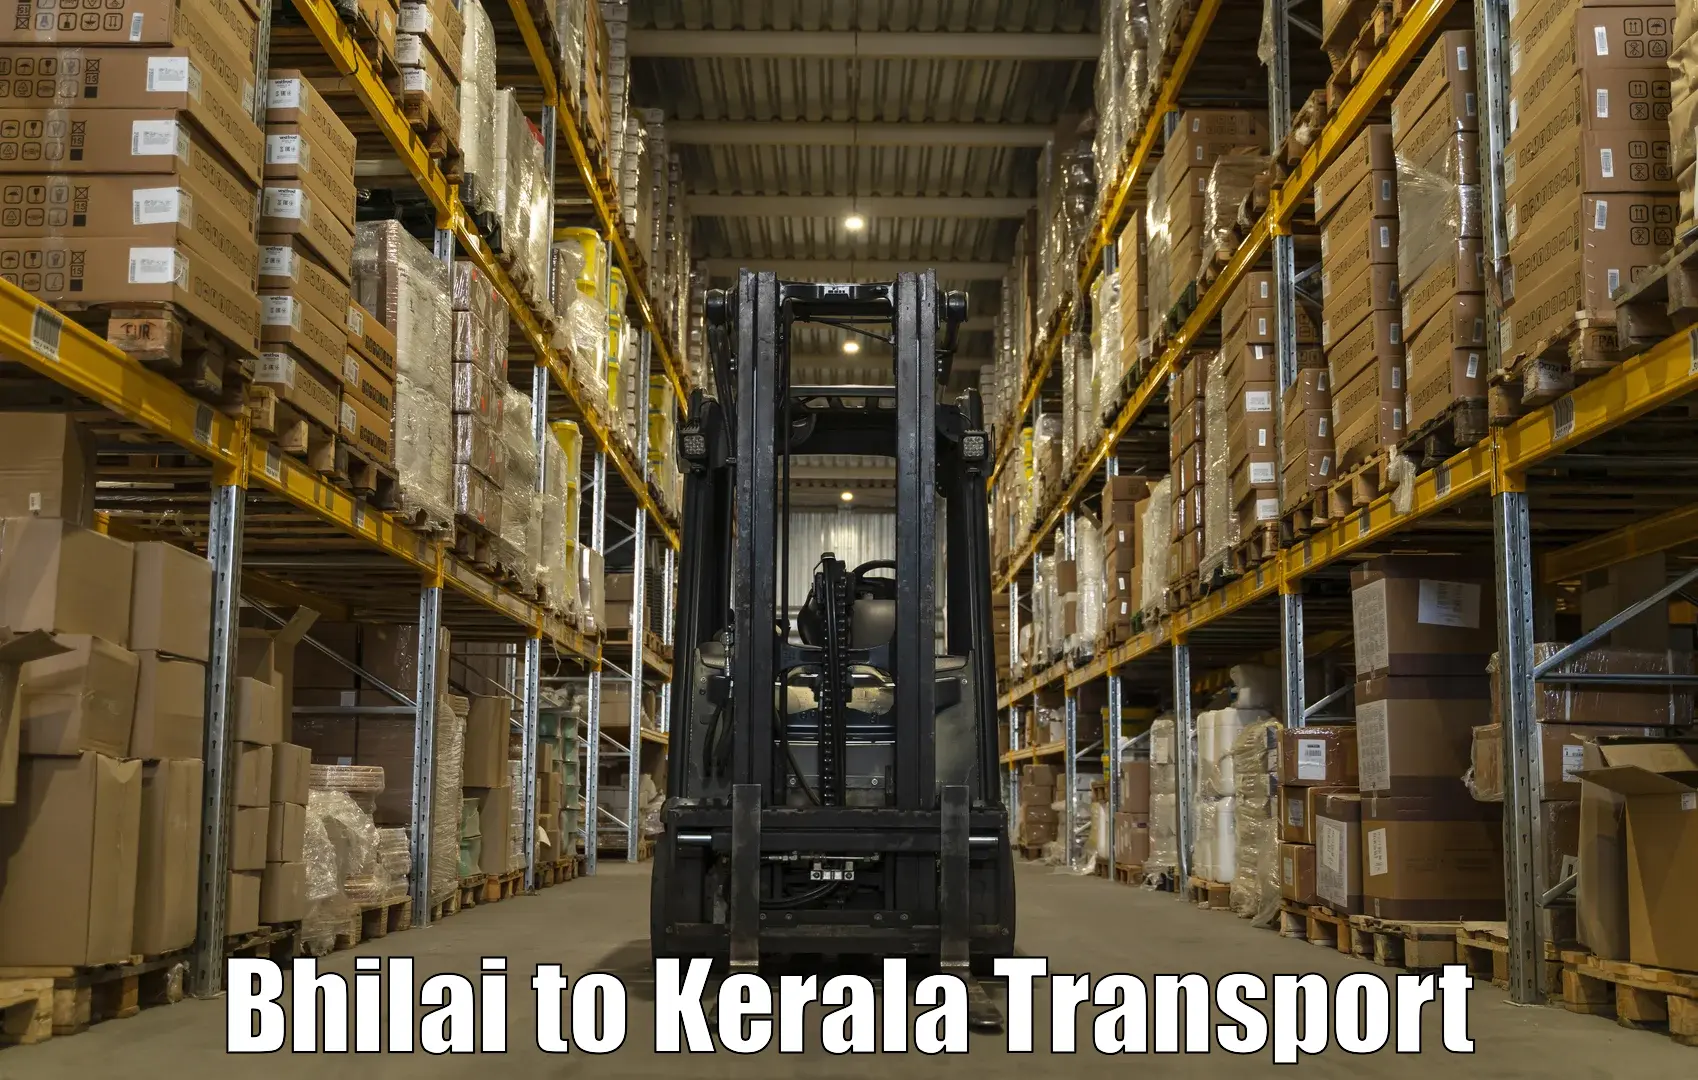 Transport in sharing Bhilai to Cochin